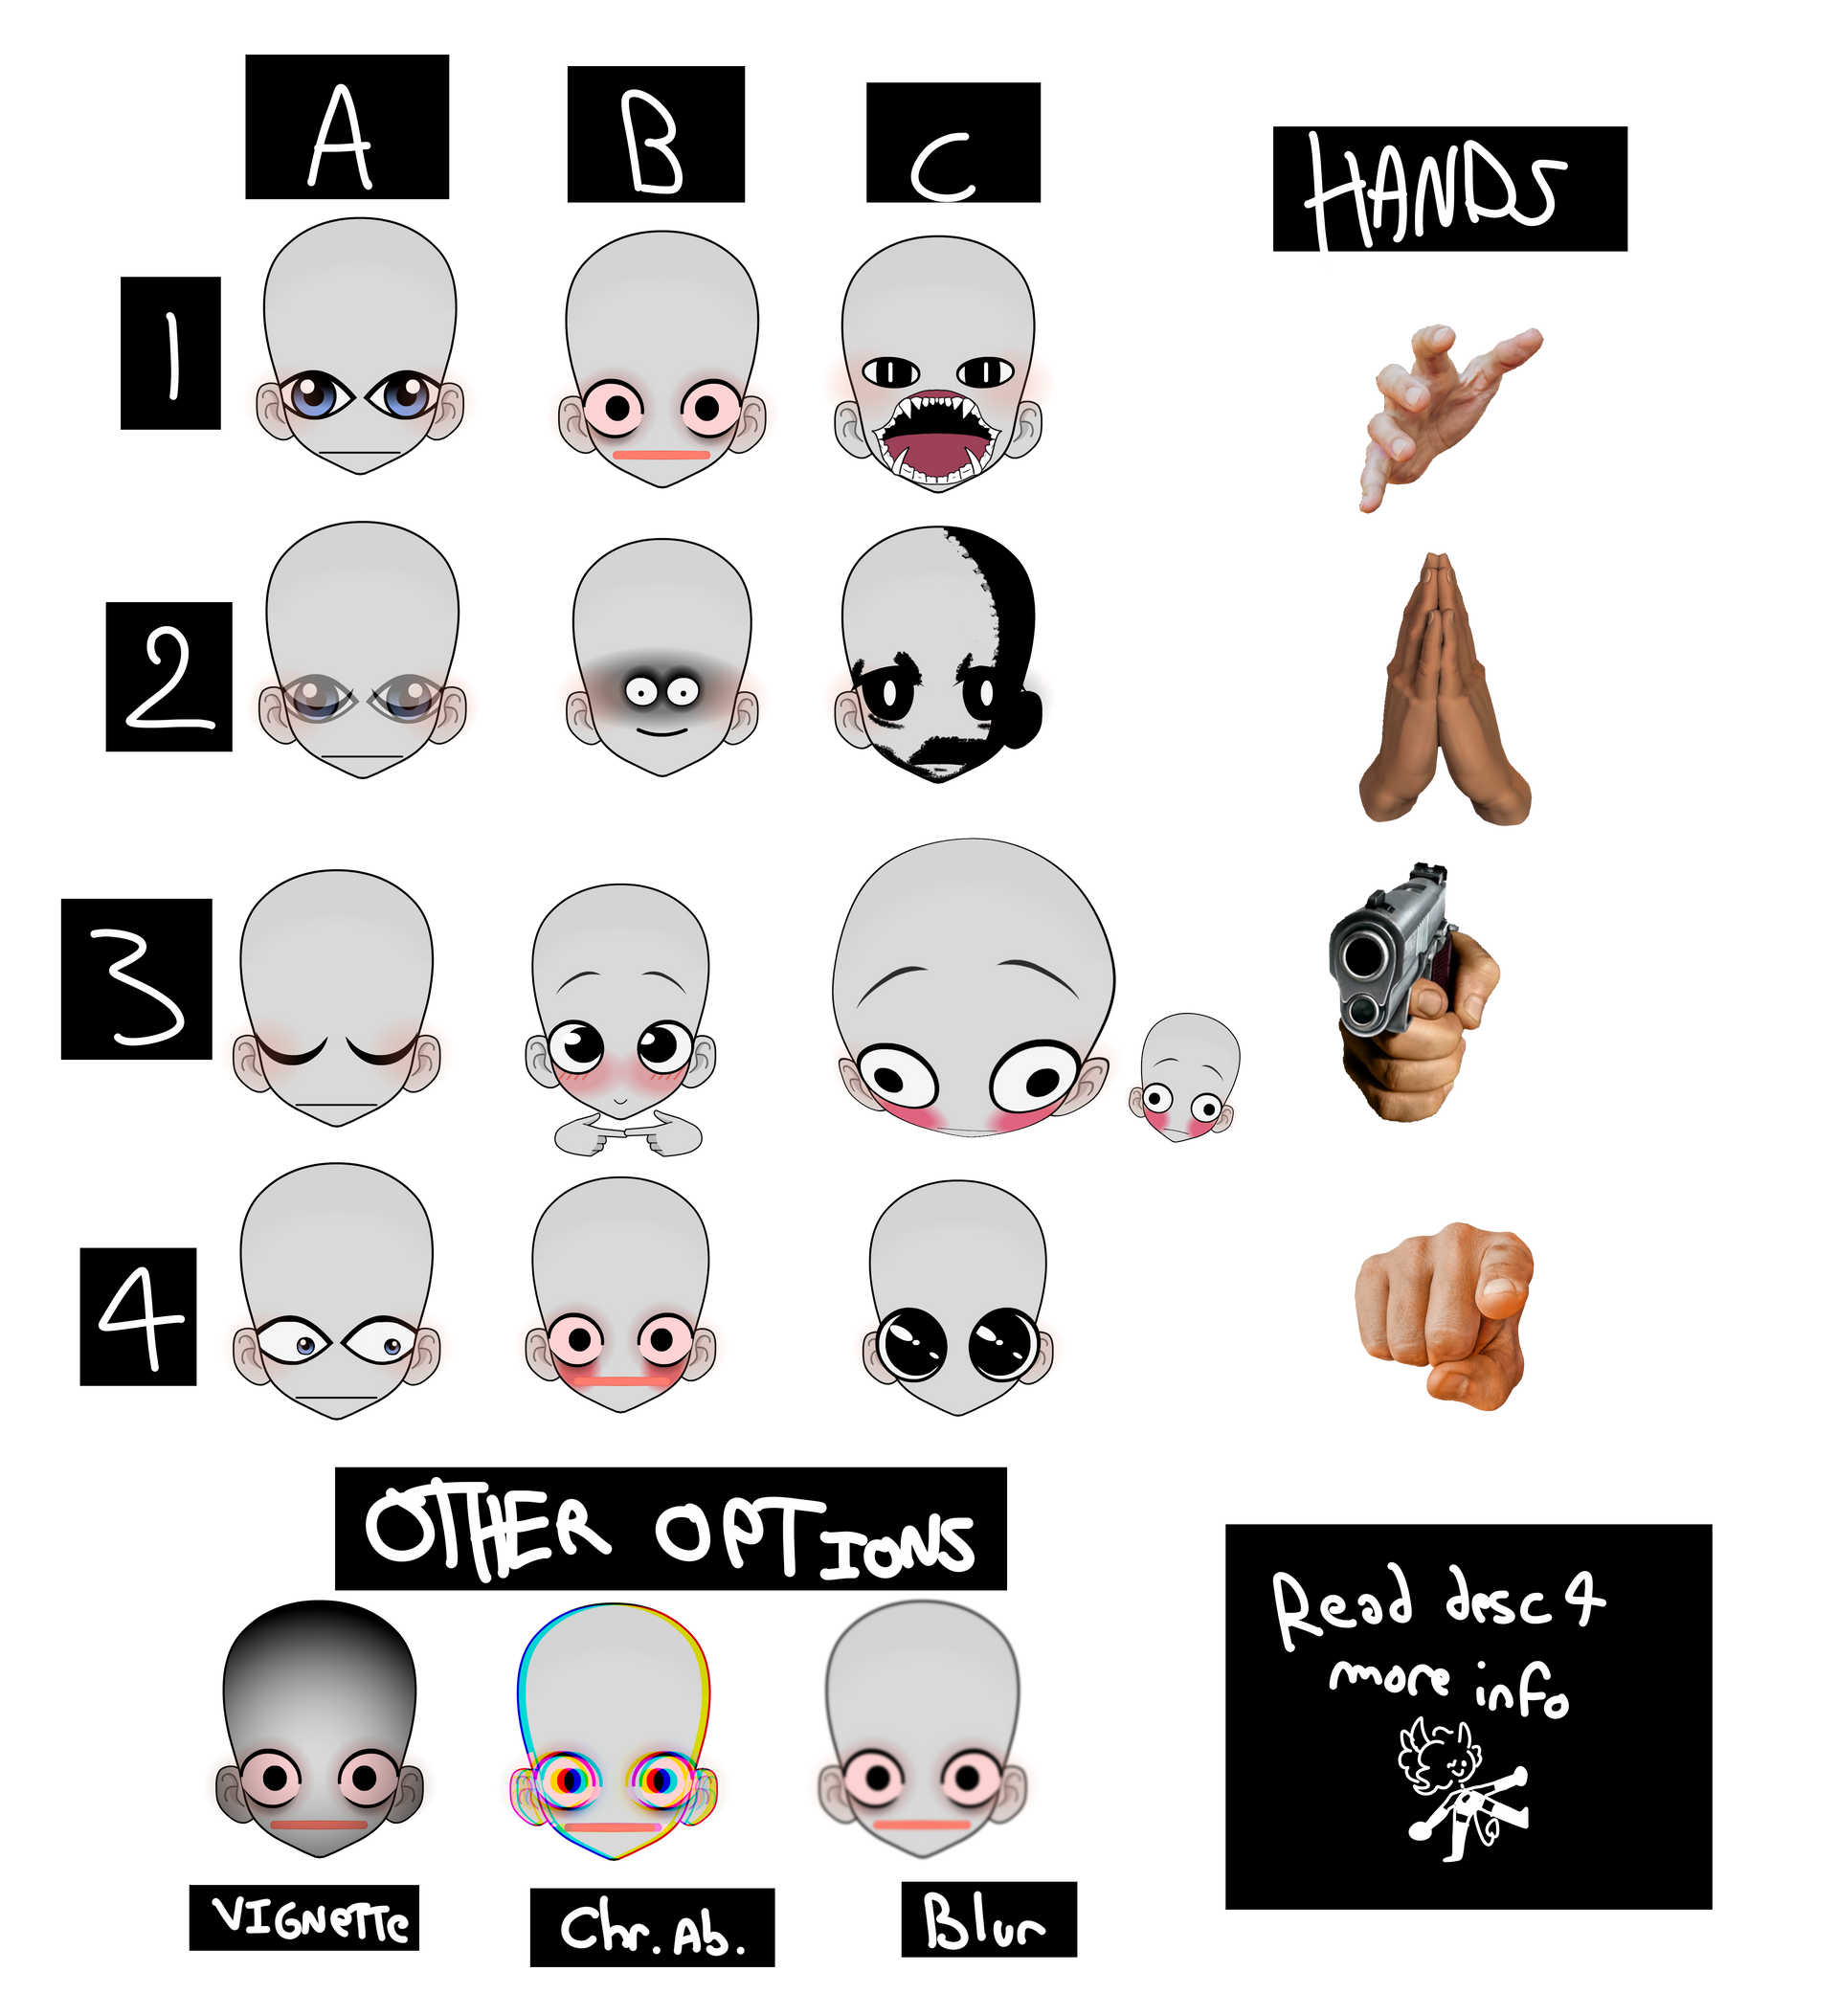 YCH - Cursed emojis - YCH.Commishes